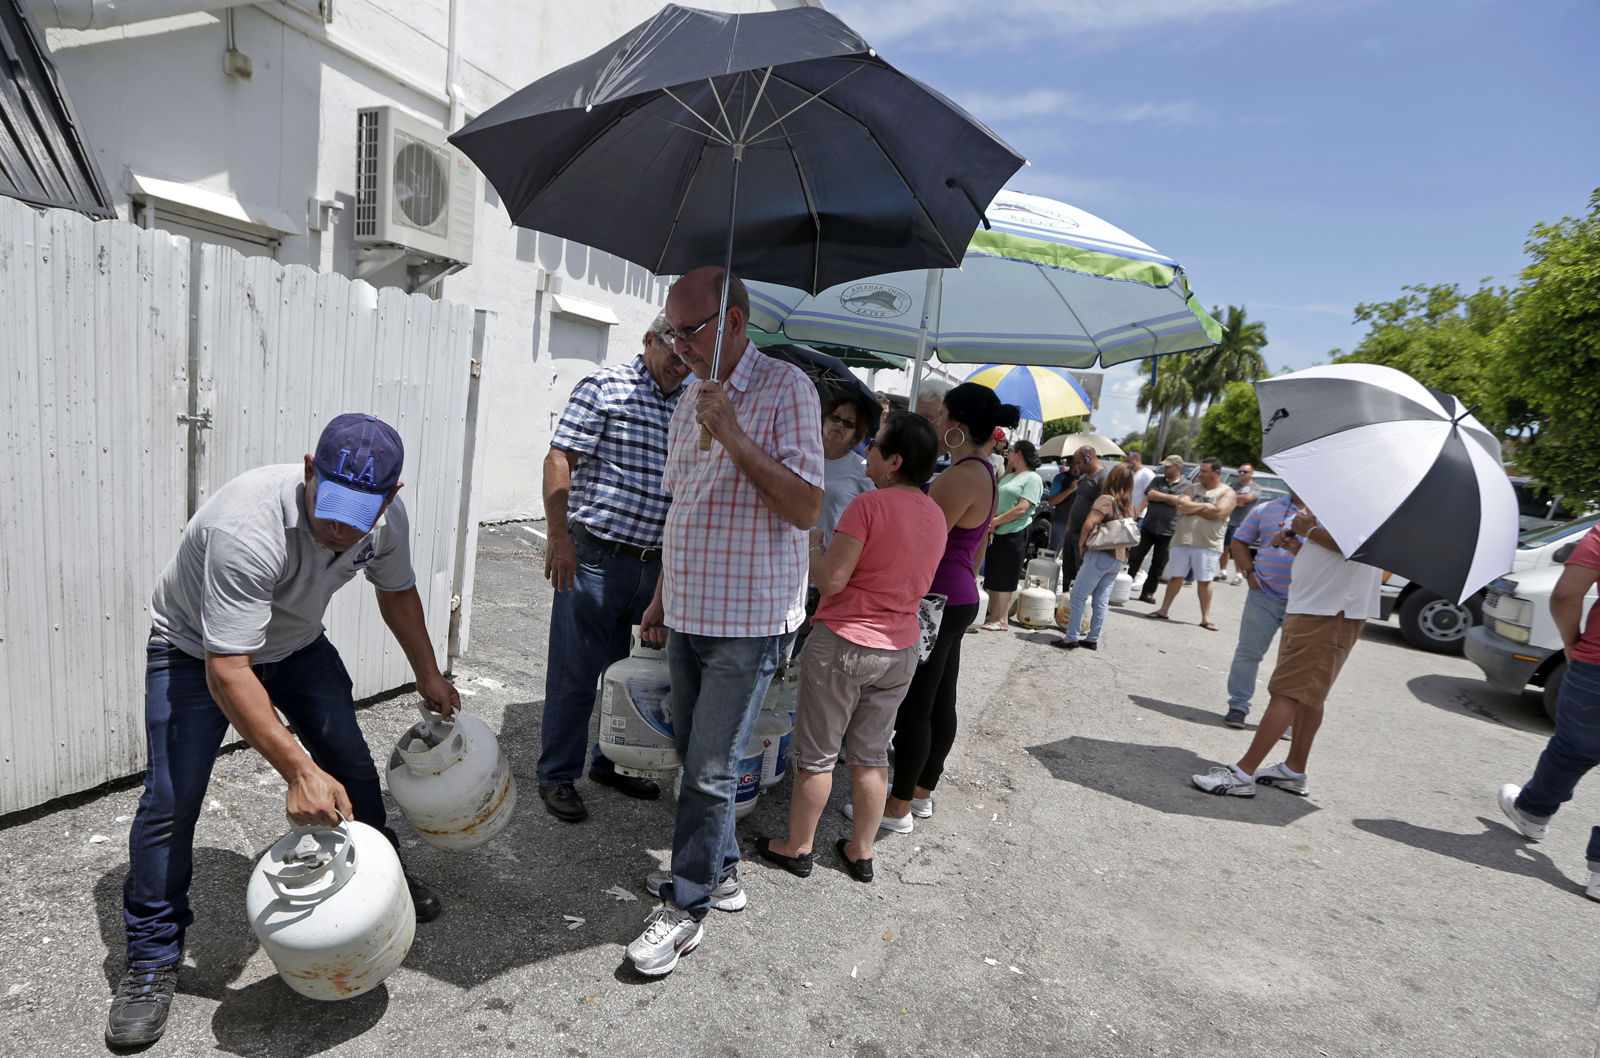 Residents stand in line to purchase propane gas as they prepare for Hurricane Irma, Tuesday, Sept. 5, 2017, in Hialeah, Fla. Hurricane Irma grew into a dangerous Category 5 storm, the most powerful seen in the Atlantic in over a decade, and roared toward islands in the northeast Caribbean Tuesday on a path that could eventually take it to the United States. (AP Photo/Alan Diaz)